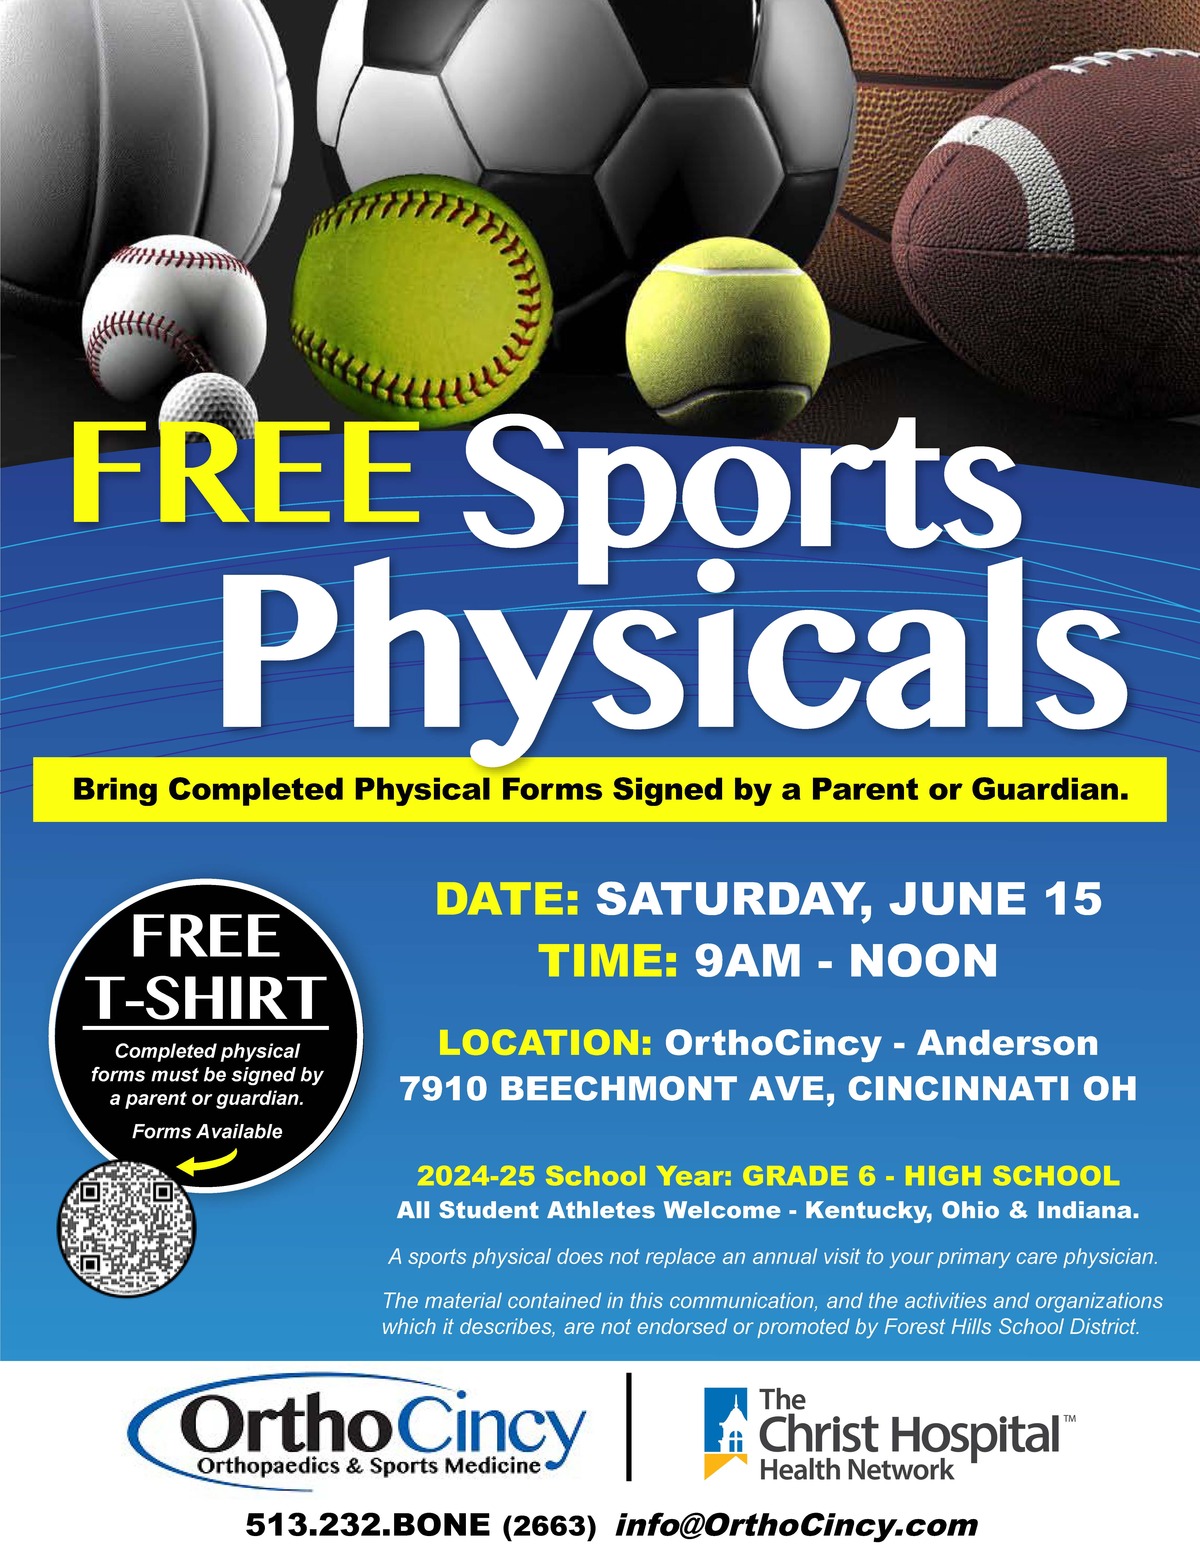 Flyer promoting the Free Sports Physical Event